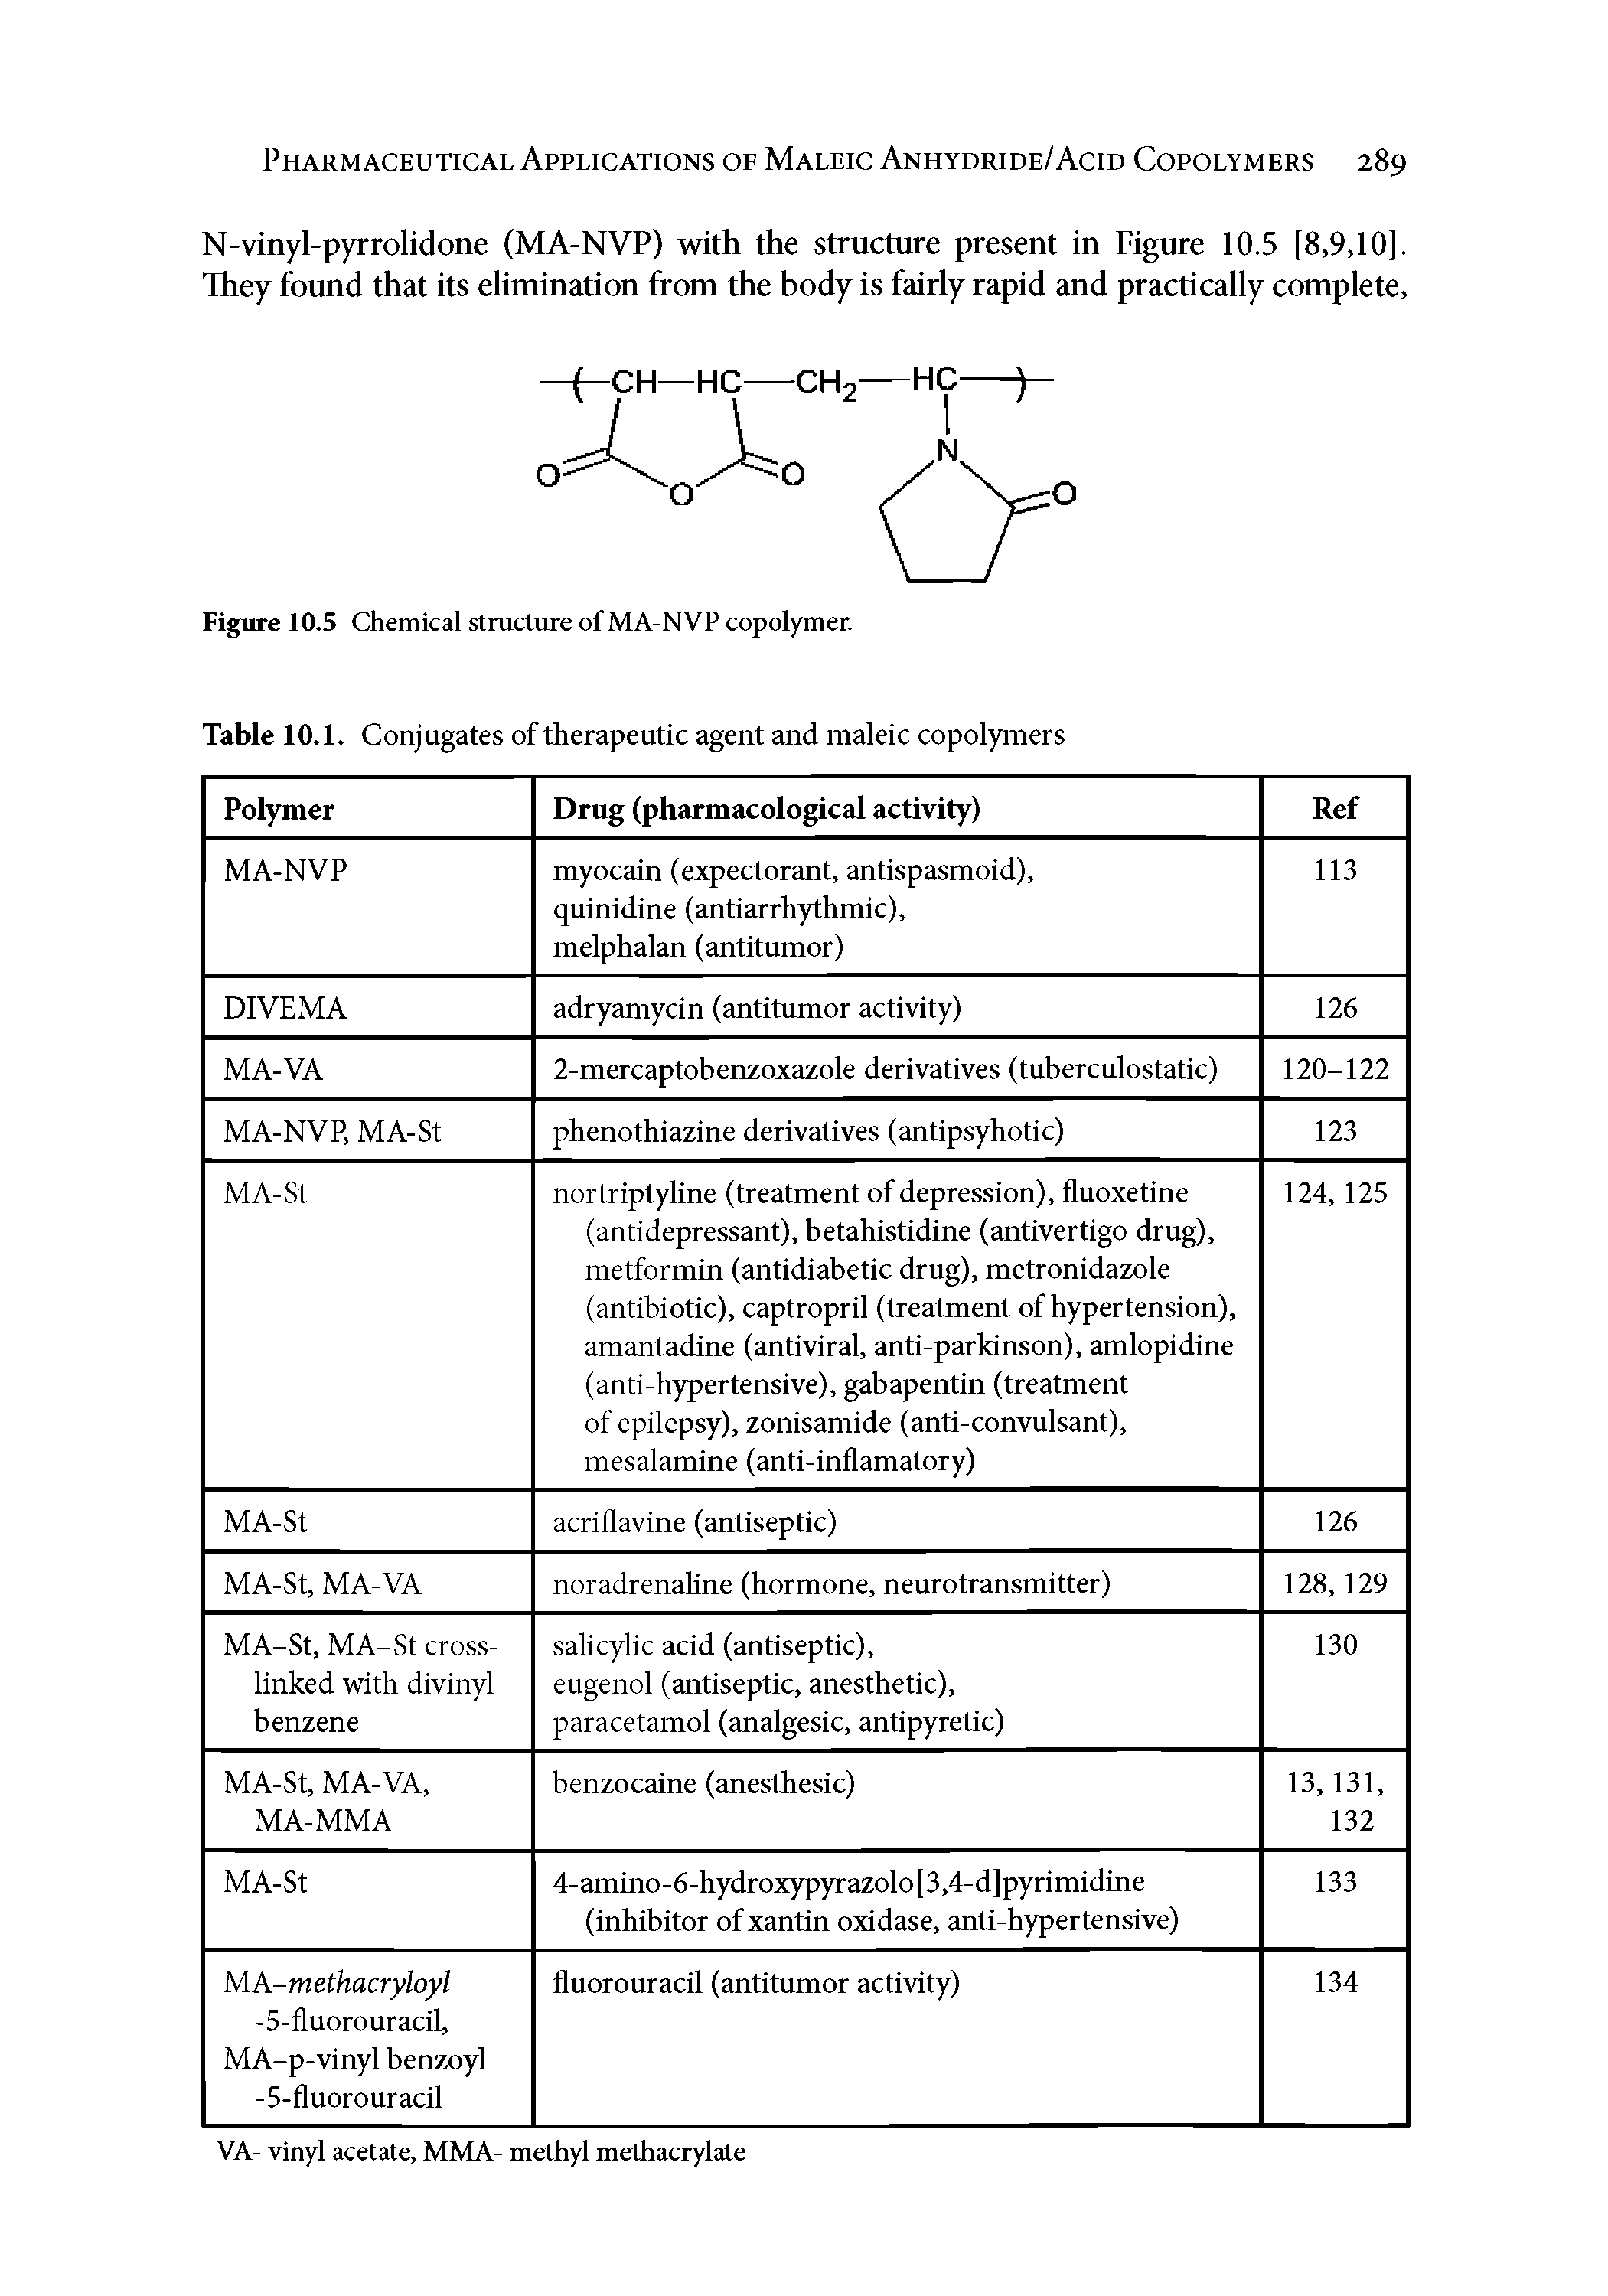 Table 10.1. Conjugates of therapeutic agent and maleic copolymers...